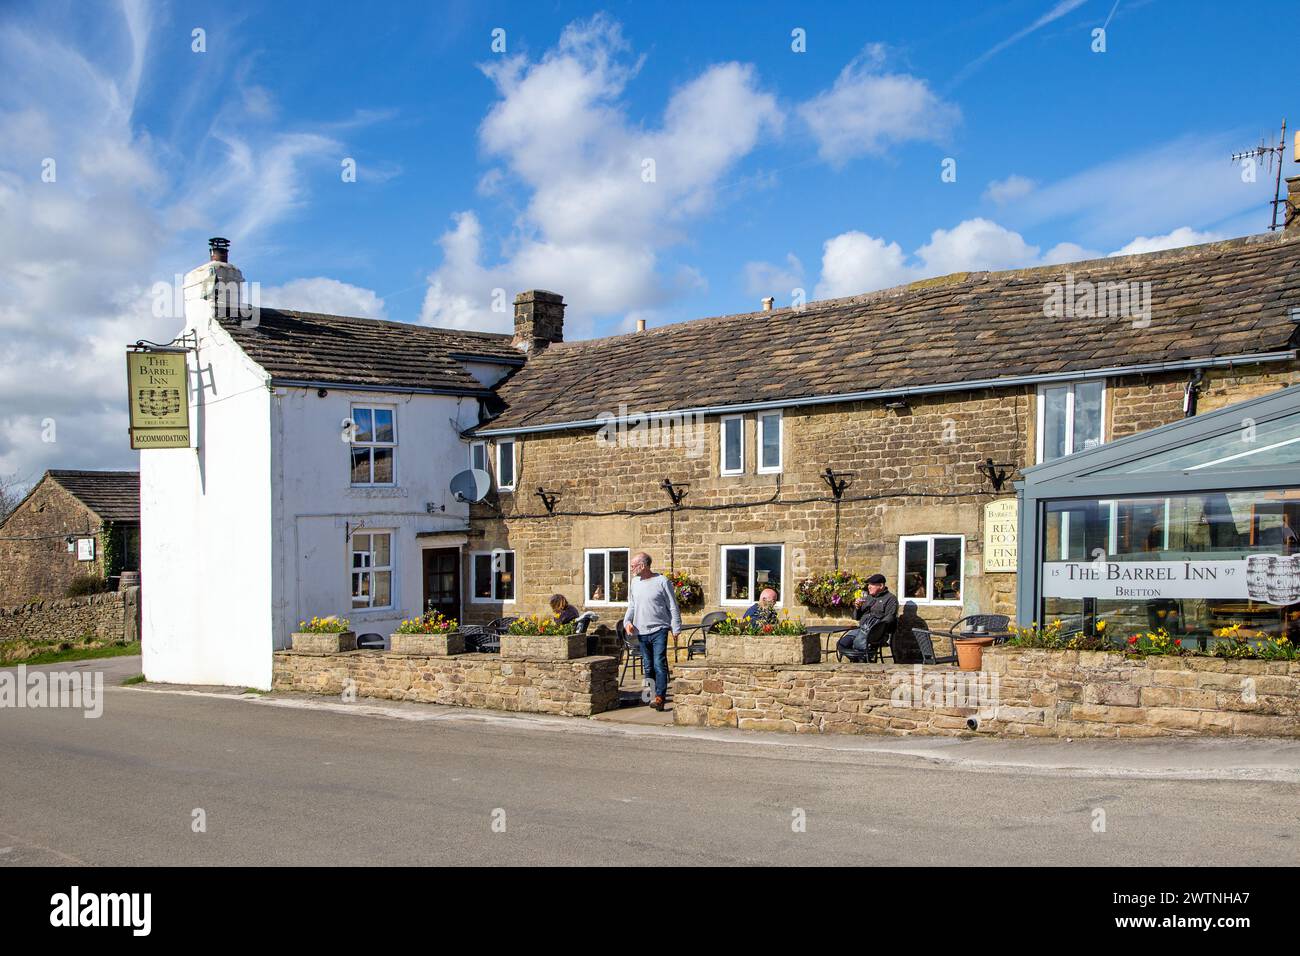 The Barrel Inn at Bretton the highest pub in Derbyshire dates back to 1597 and stands at the head of Bretton Clough in the Peak District National Park Stock Photo